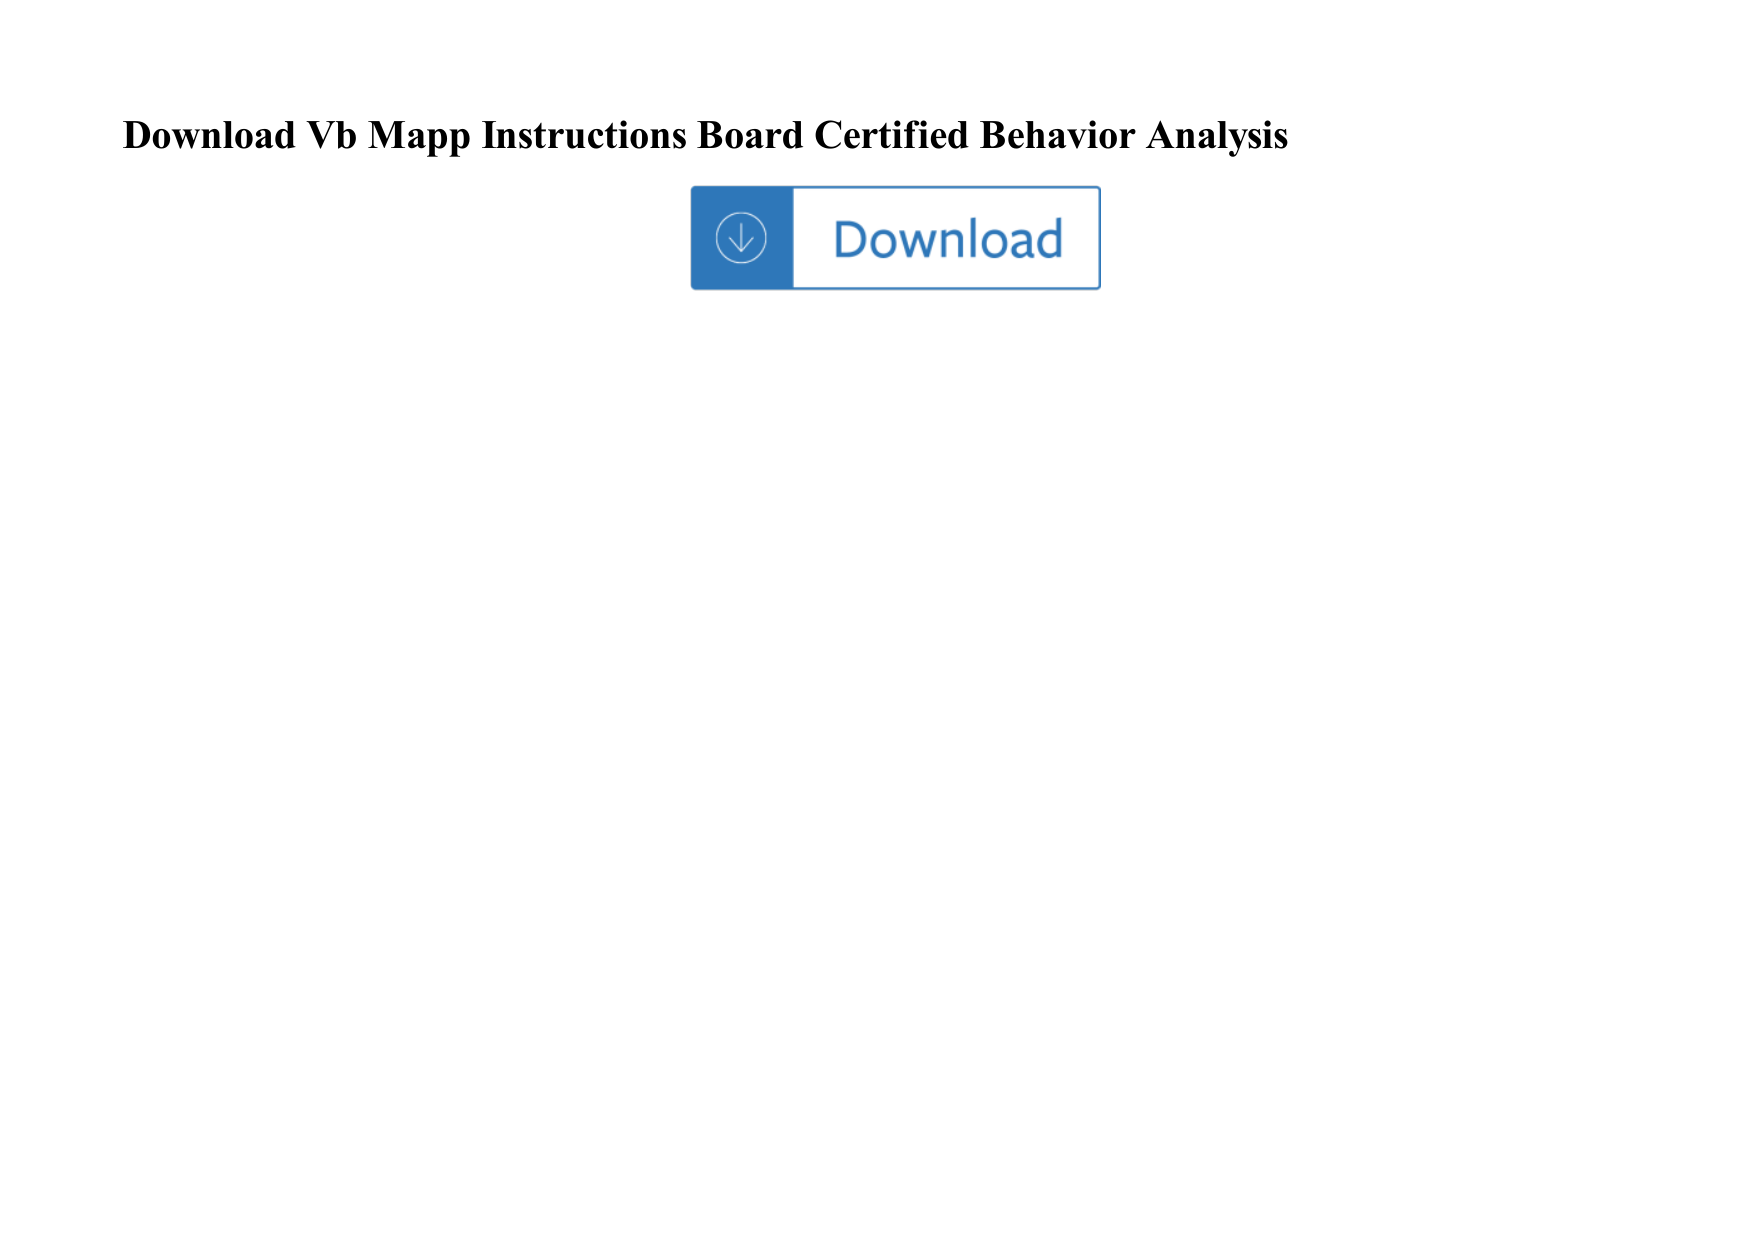 Page 1 of 1 - Vb Mapp Instructions Board Certified Behavior Analysis Vb-mapp-instructions-board-certified-behavior-analysis